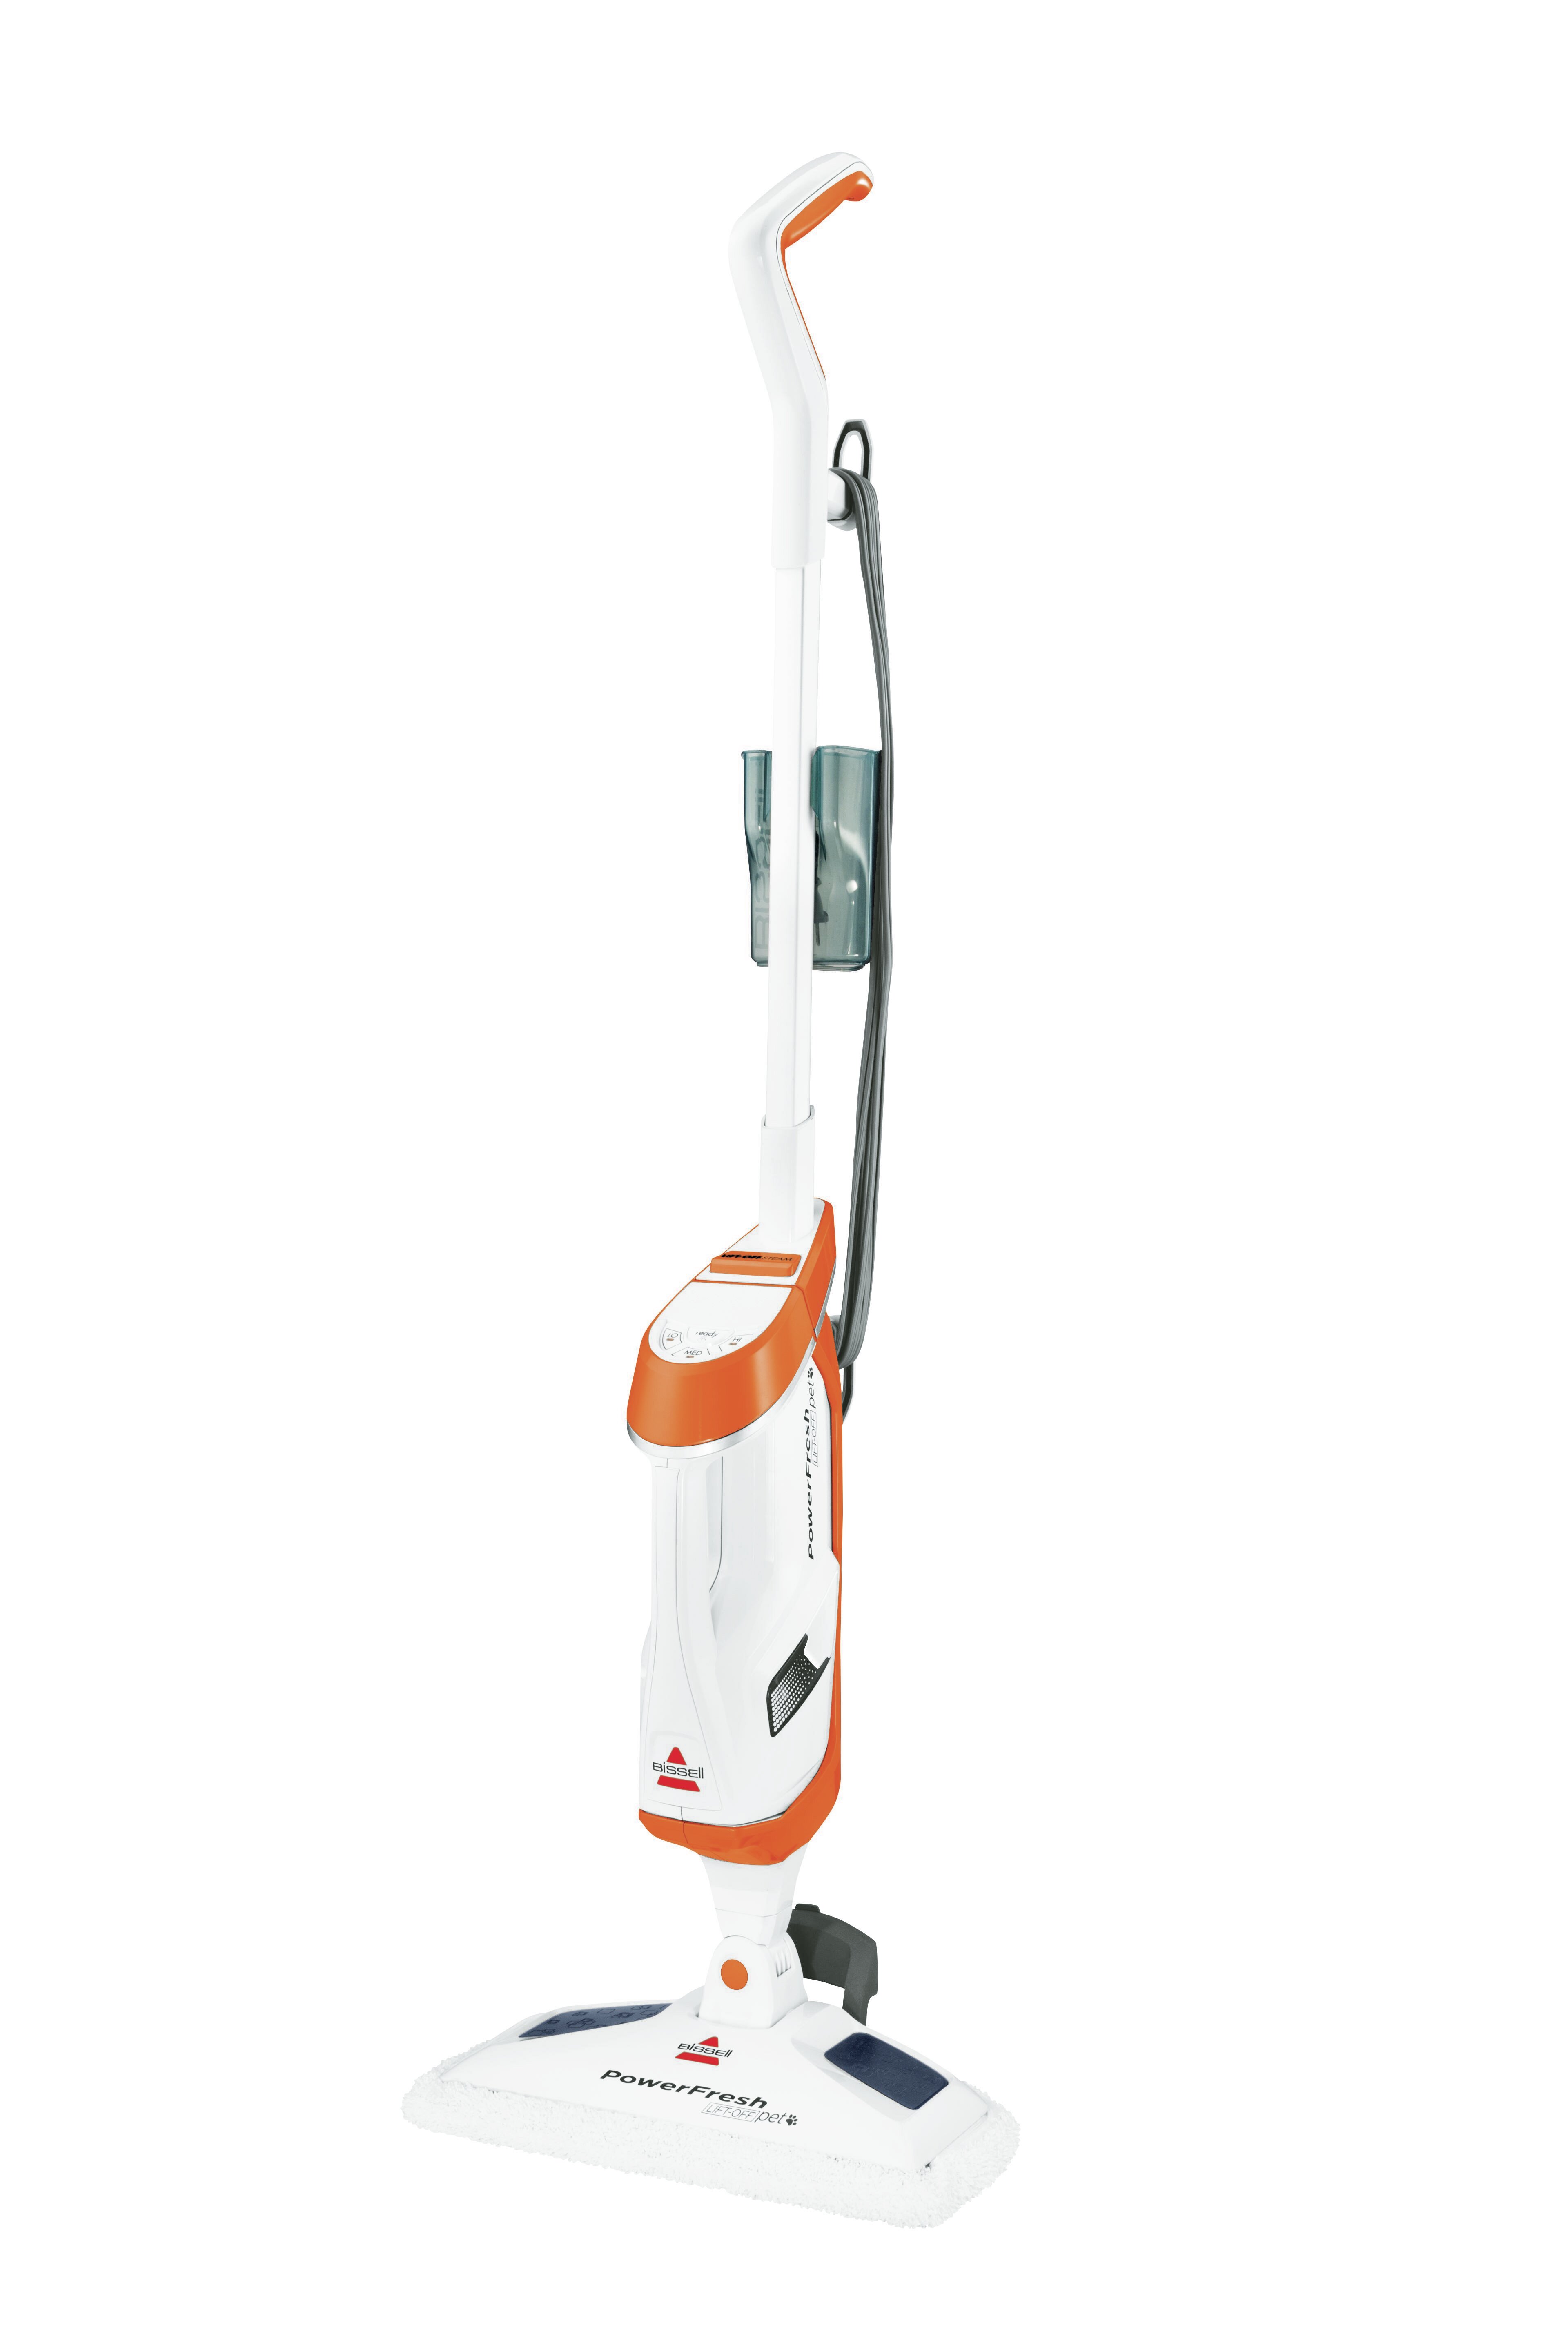 Bissell PowerFresh Pet Lift-Off 2-in-1 Scrubbing & Sanitizing Steam Mop &  Reviews